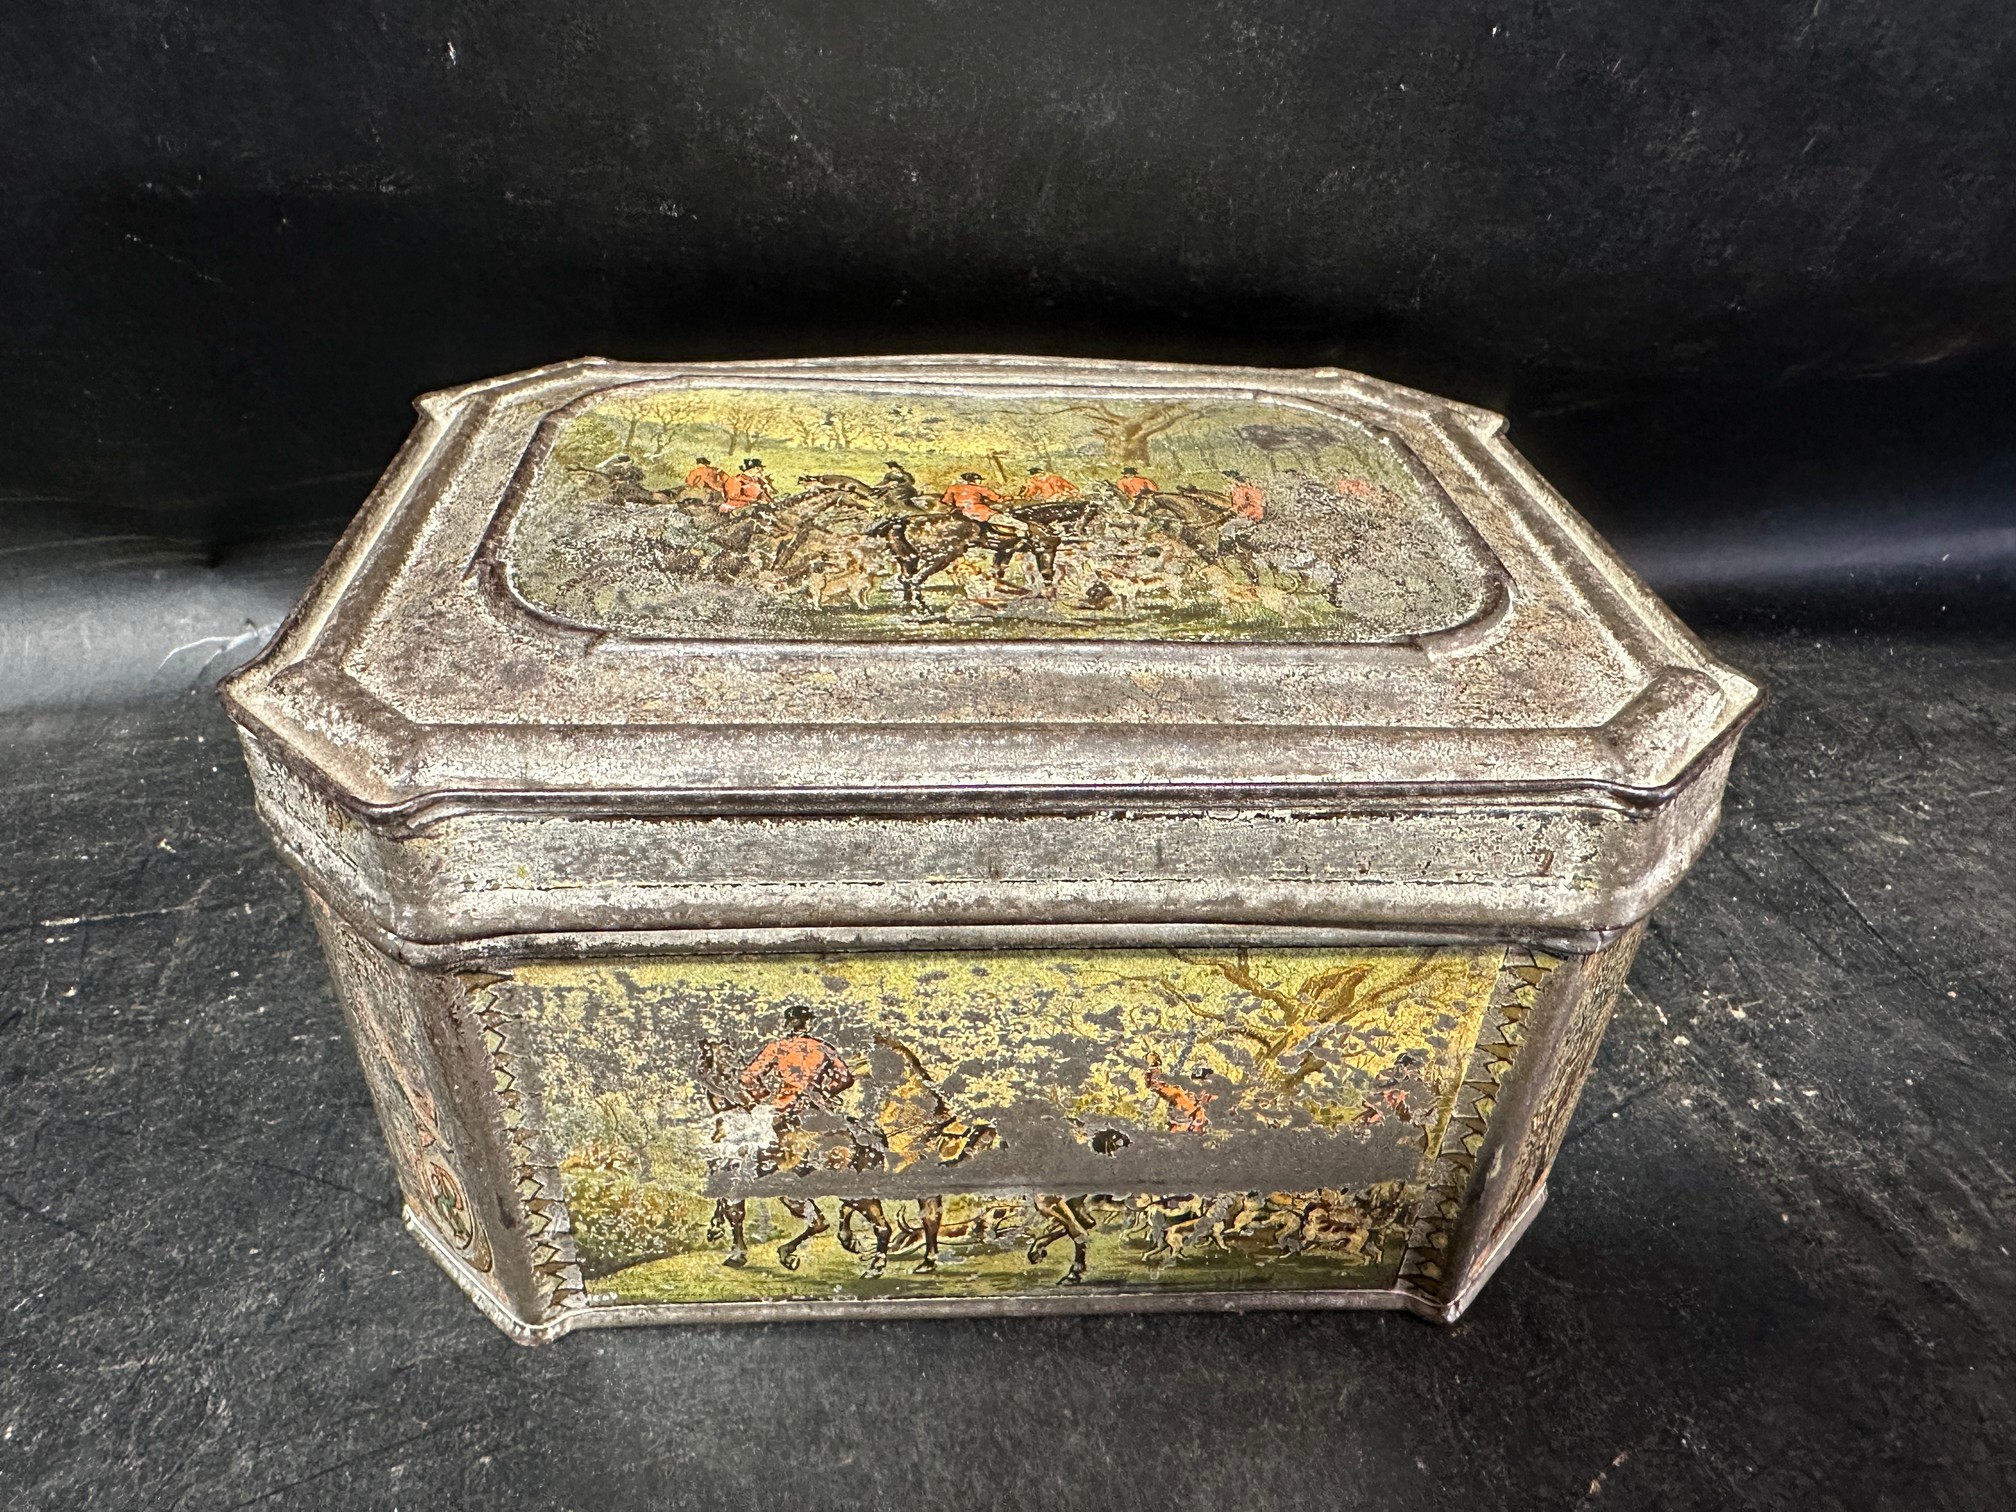 Three Huntley & Palmer's Ltd. confectionery tins including hunting scenes, horse and carts etc. - Image 4 of 9